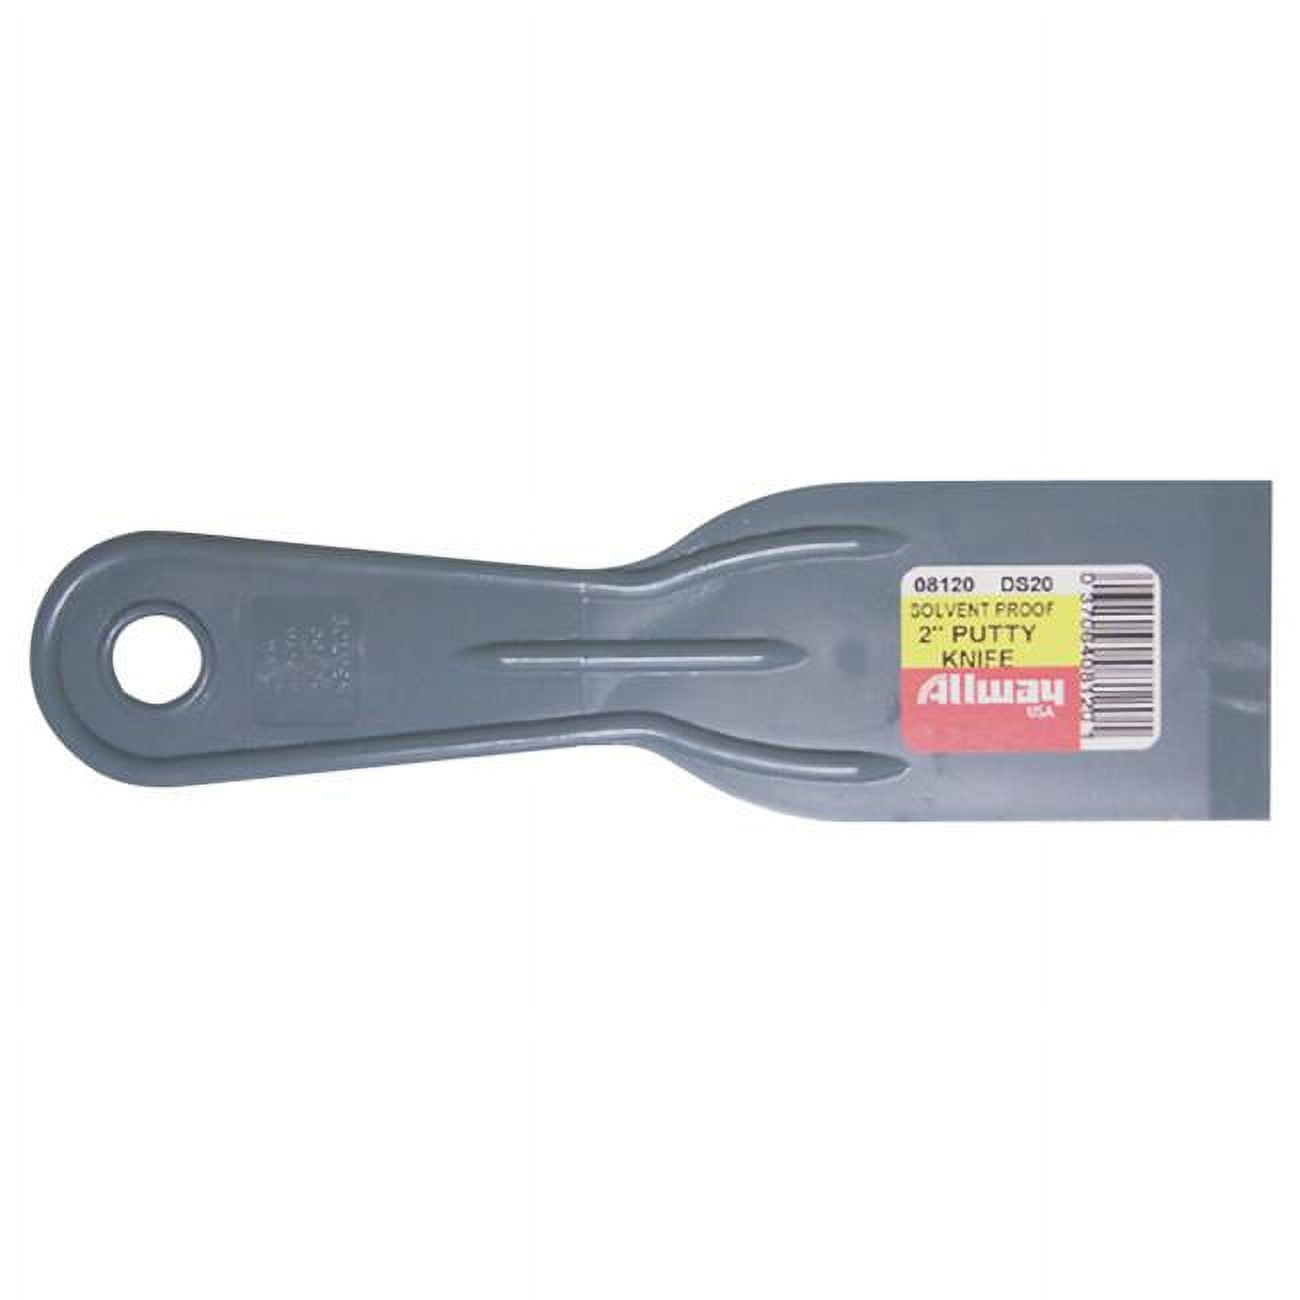 1665777 2 In. Plastic Putty Knife, Pack Of 25